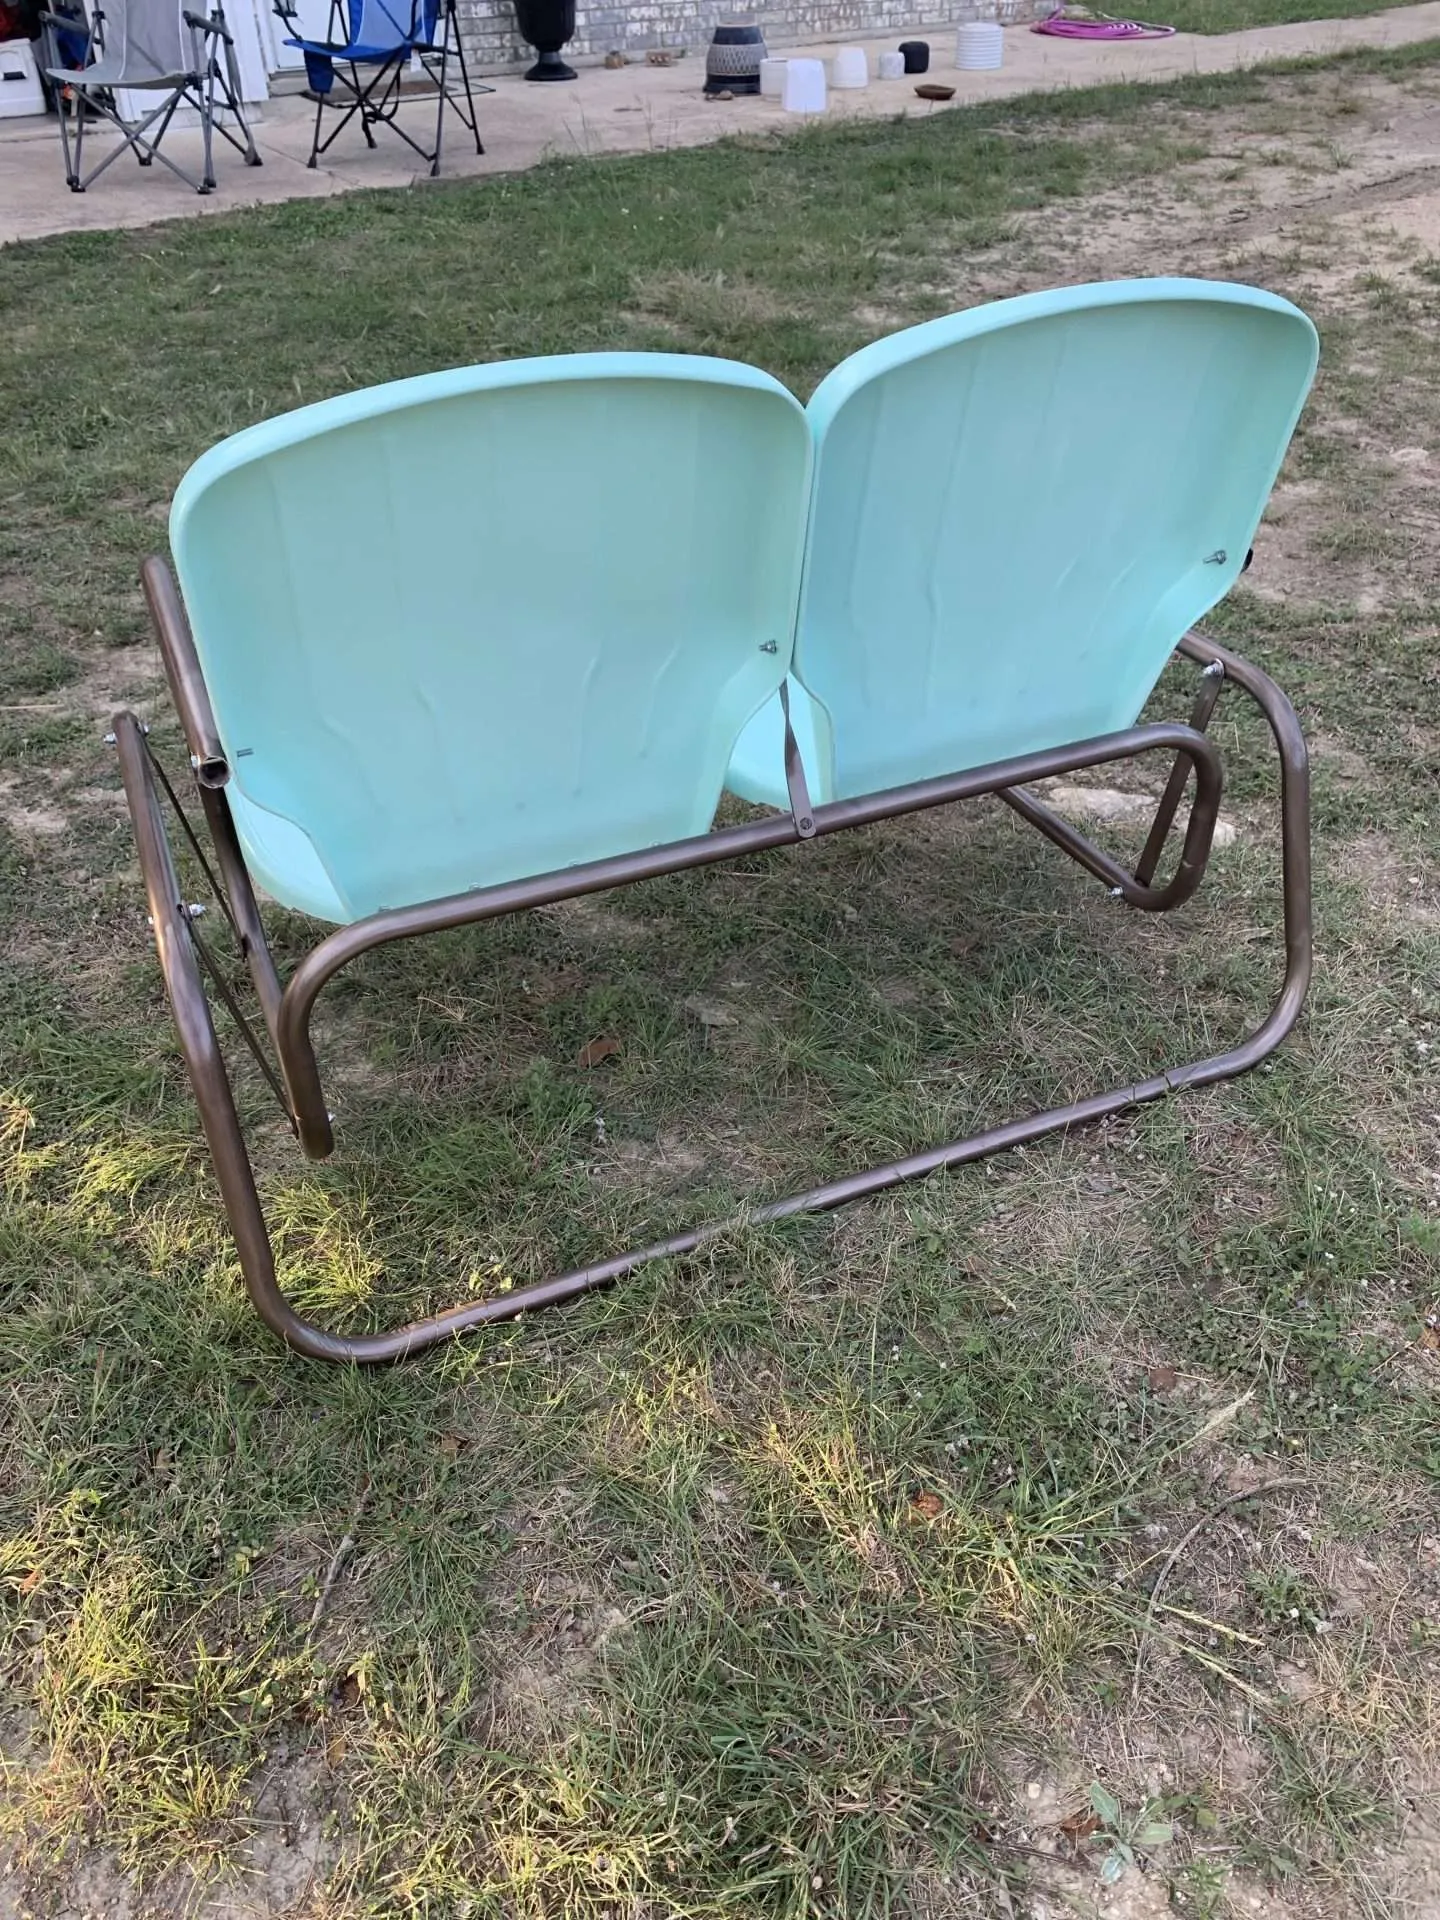 The back of a vintage metal glider that has been repainted.